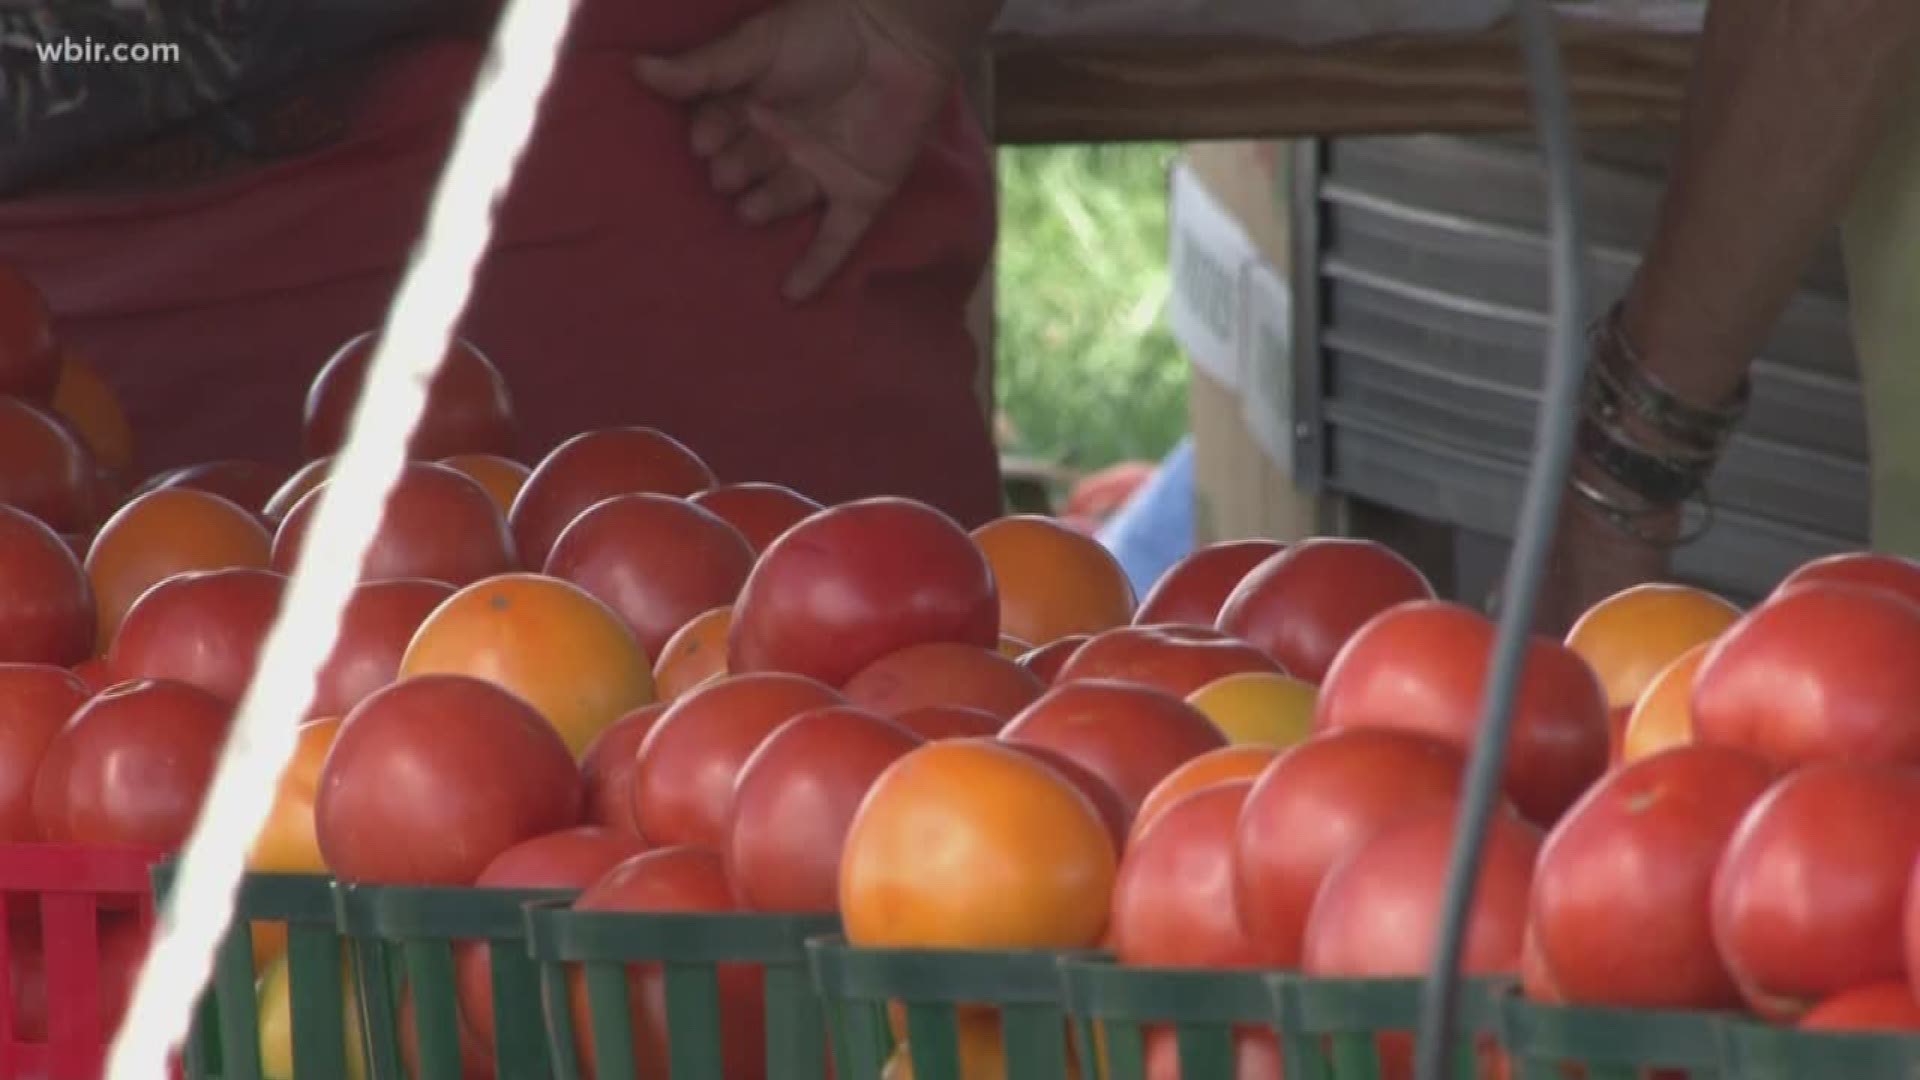 The Grainger County Tomato Festival will continue through Sunday, July 29.